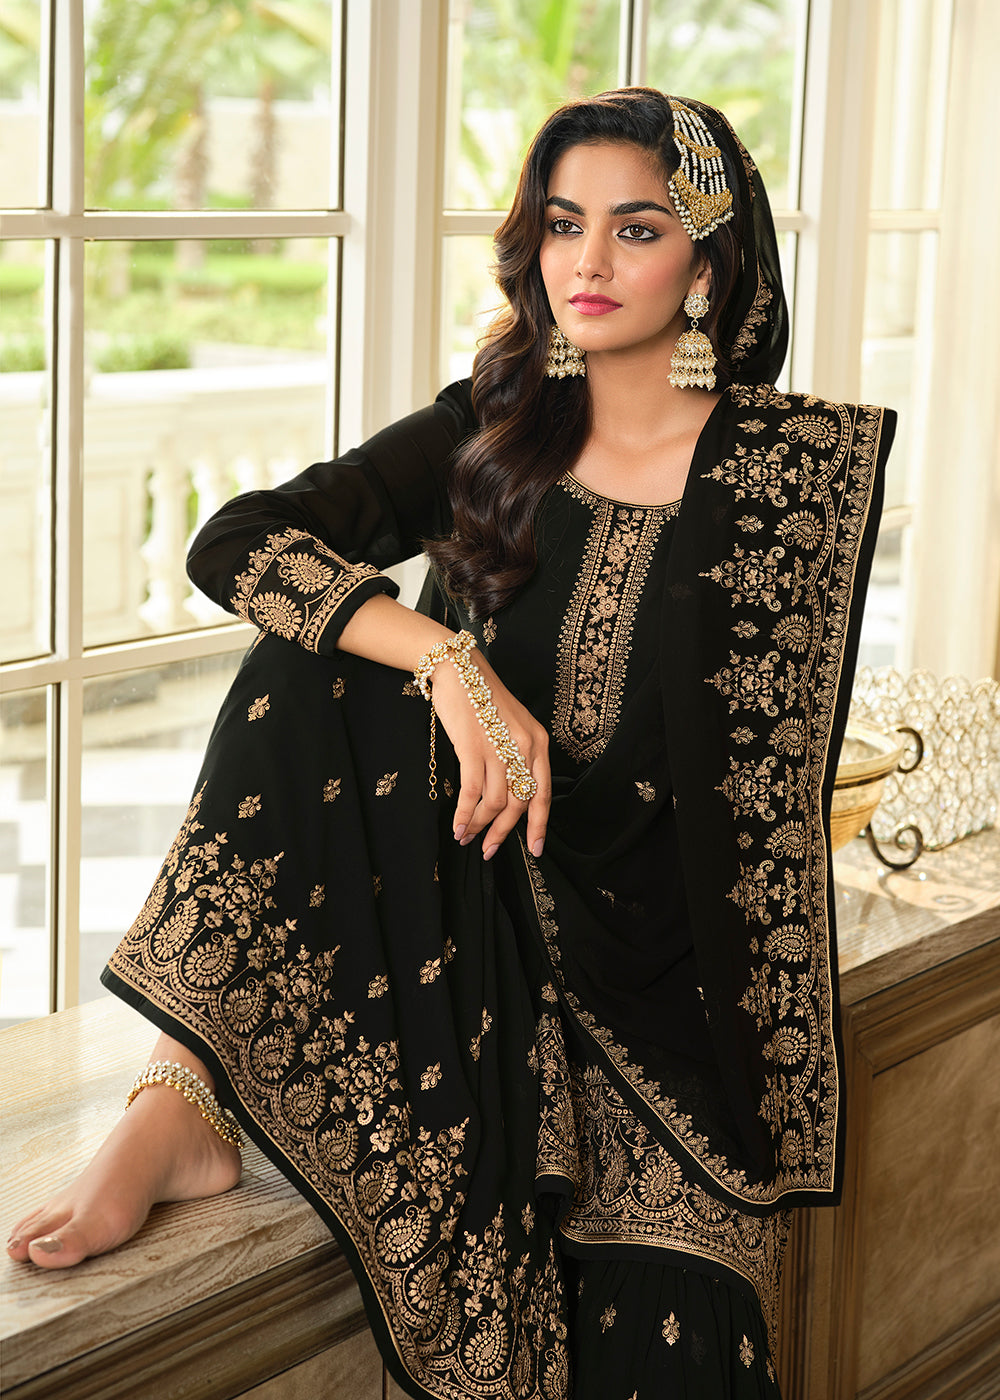 Shop Now Lovely Black Embroidered Georgette Pakistani Gharara Suit Online at Empress Clothing in USA, UK, Canada, Germany & Worldwide. 